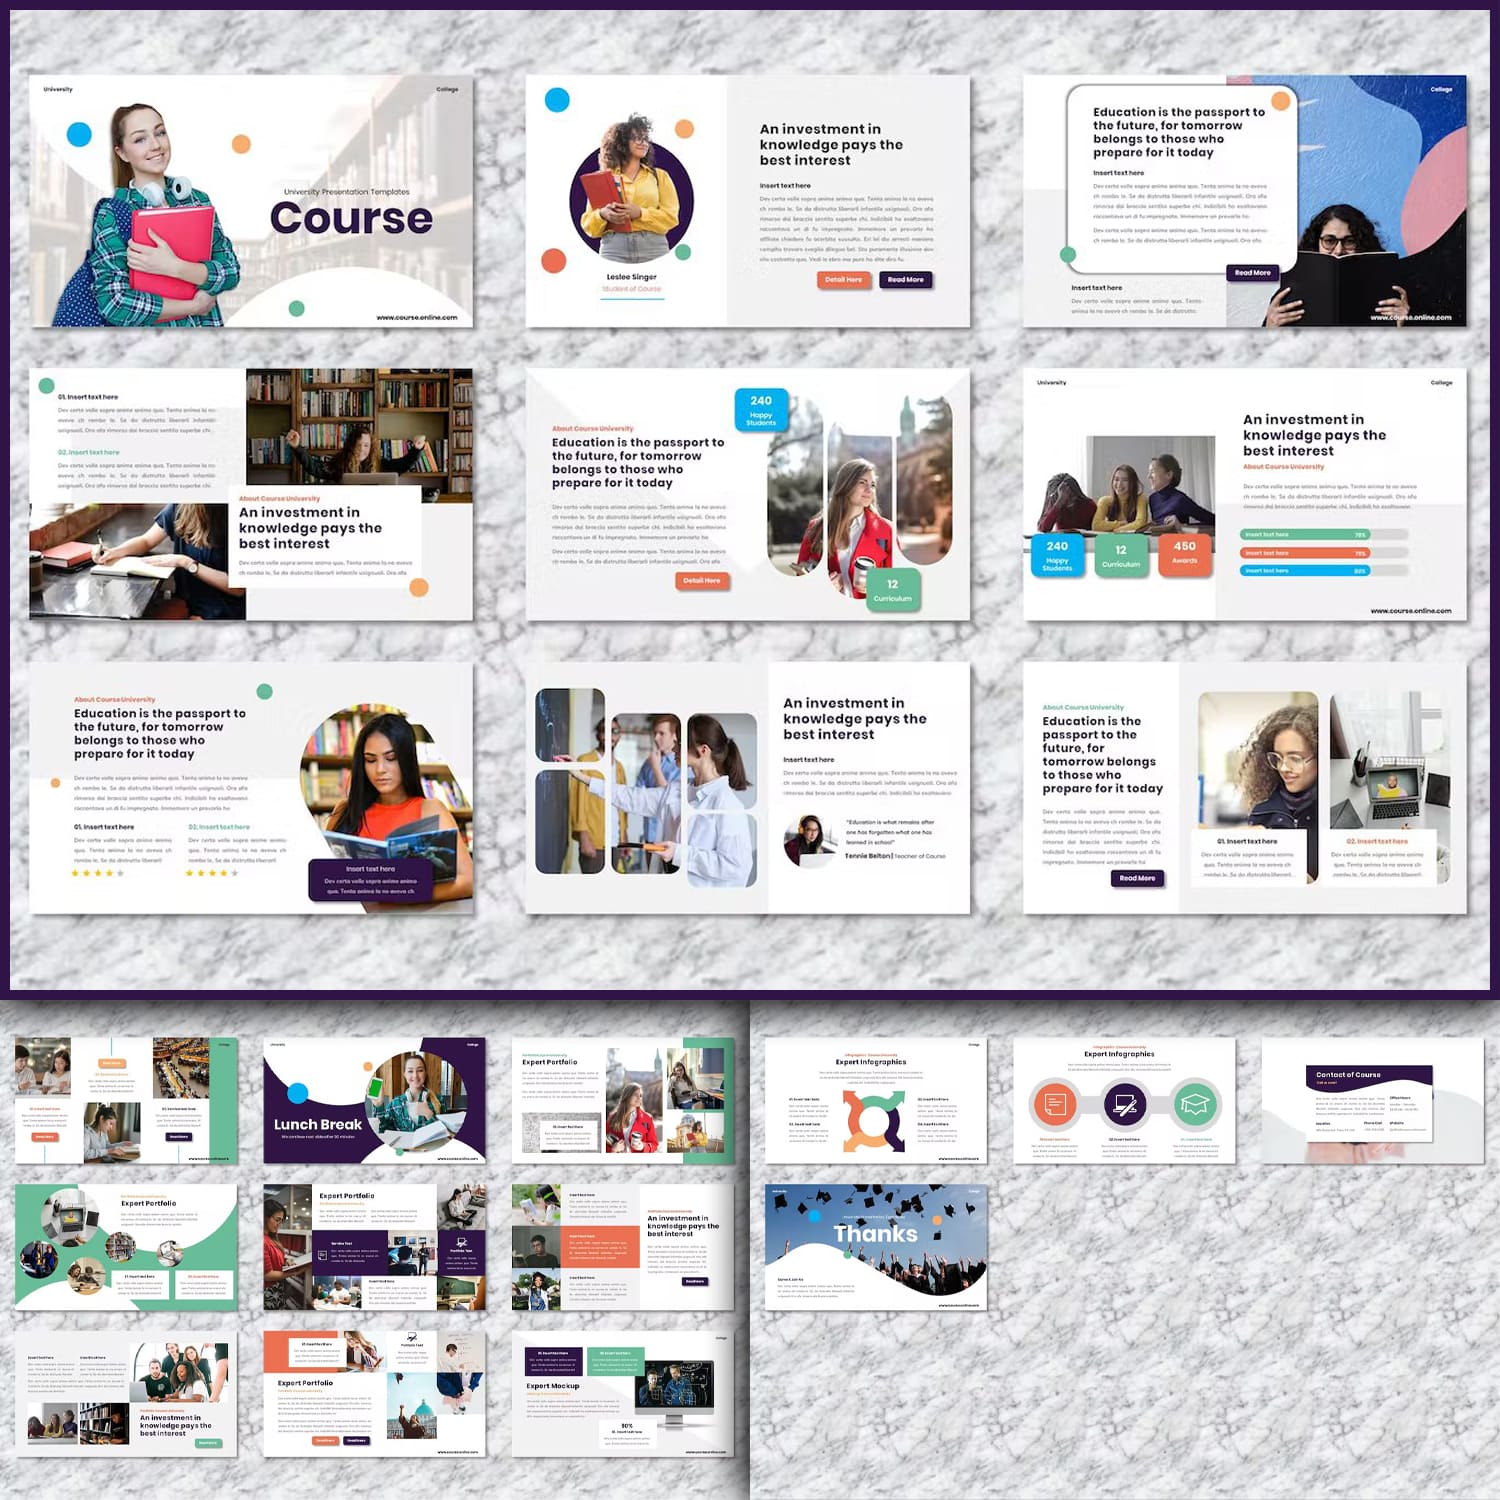 Course University Powerpoint Templates created by Yumnacreative.